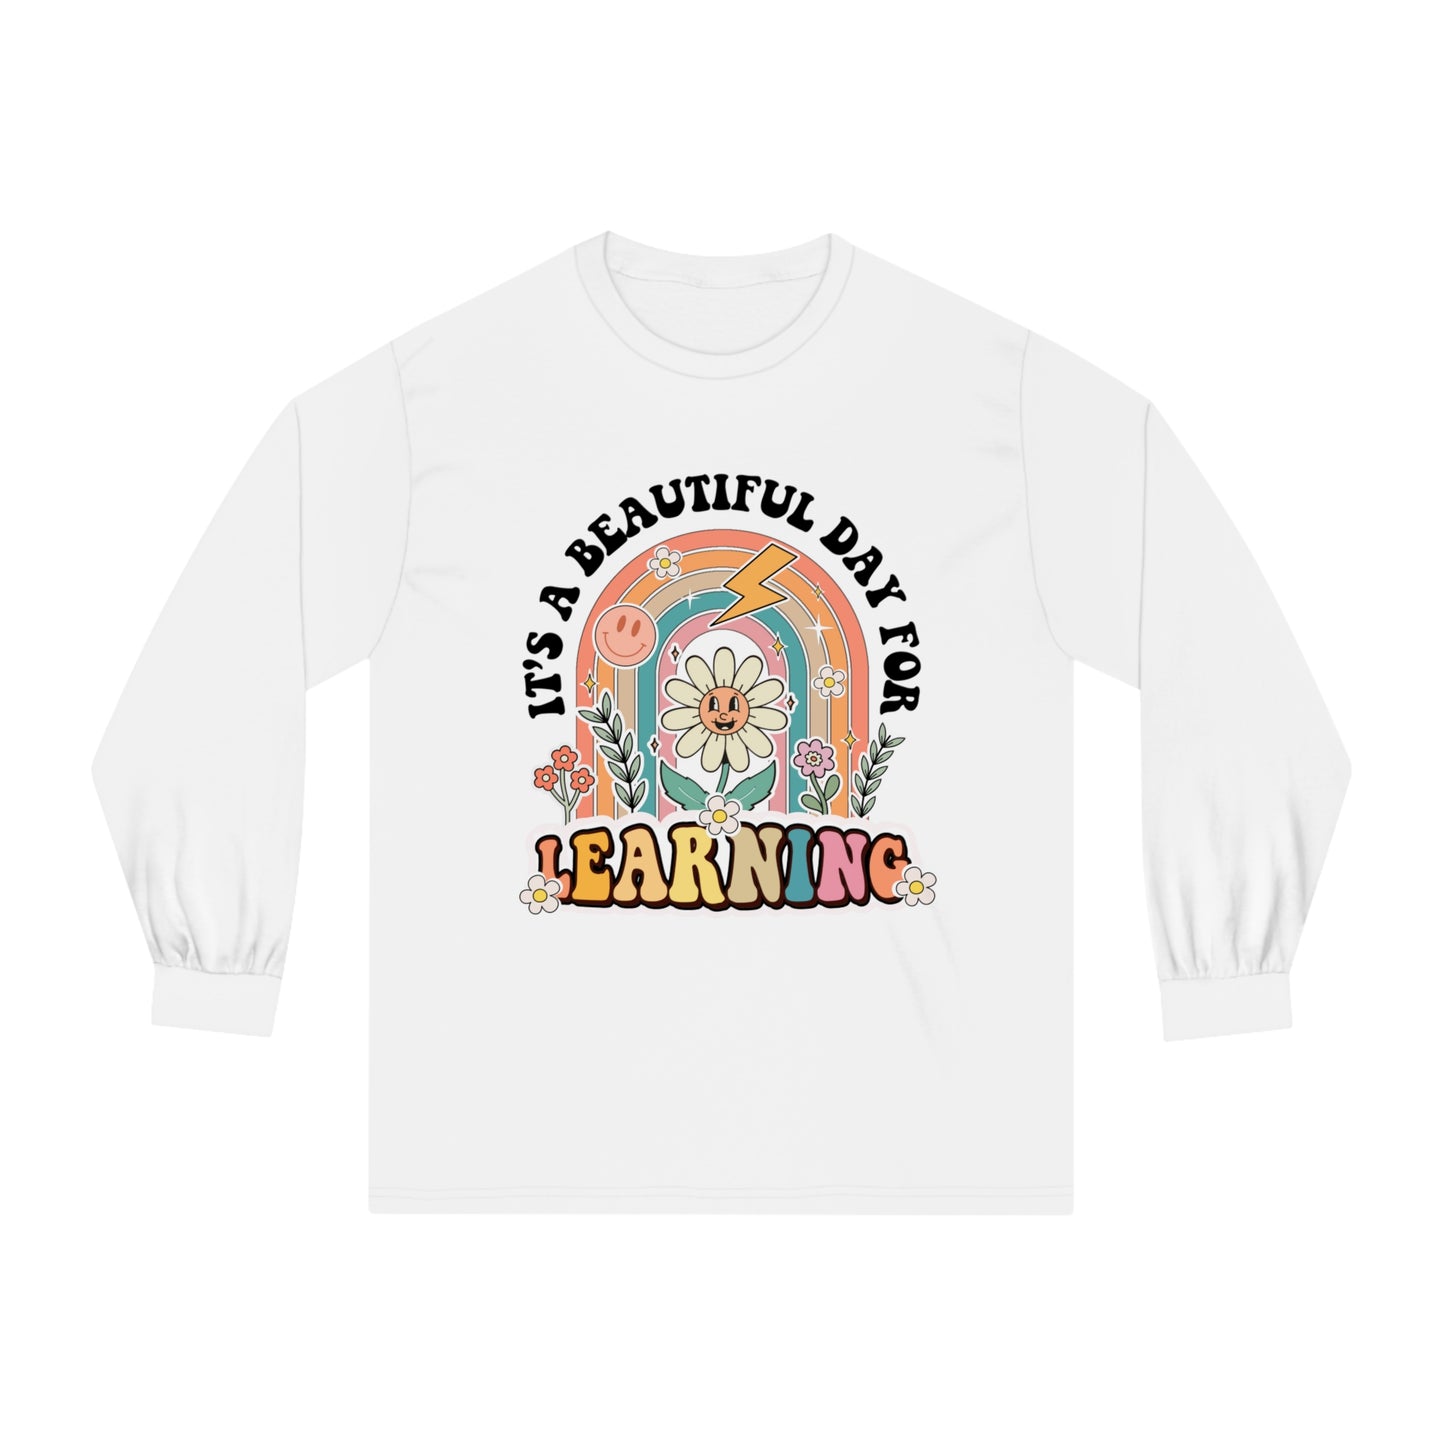 It's a Beautiful Day for Learning - Unisex Classic Long Sleeve T-Shirt